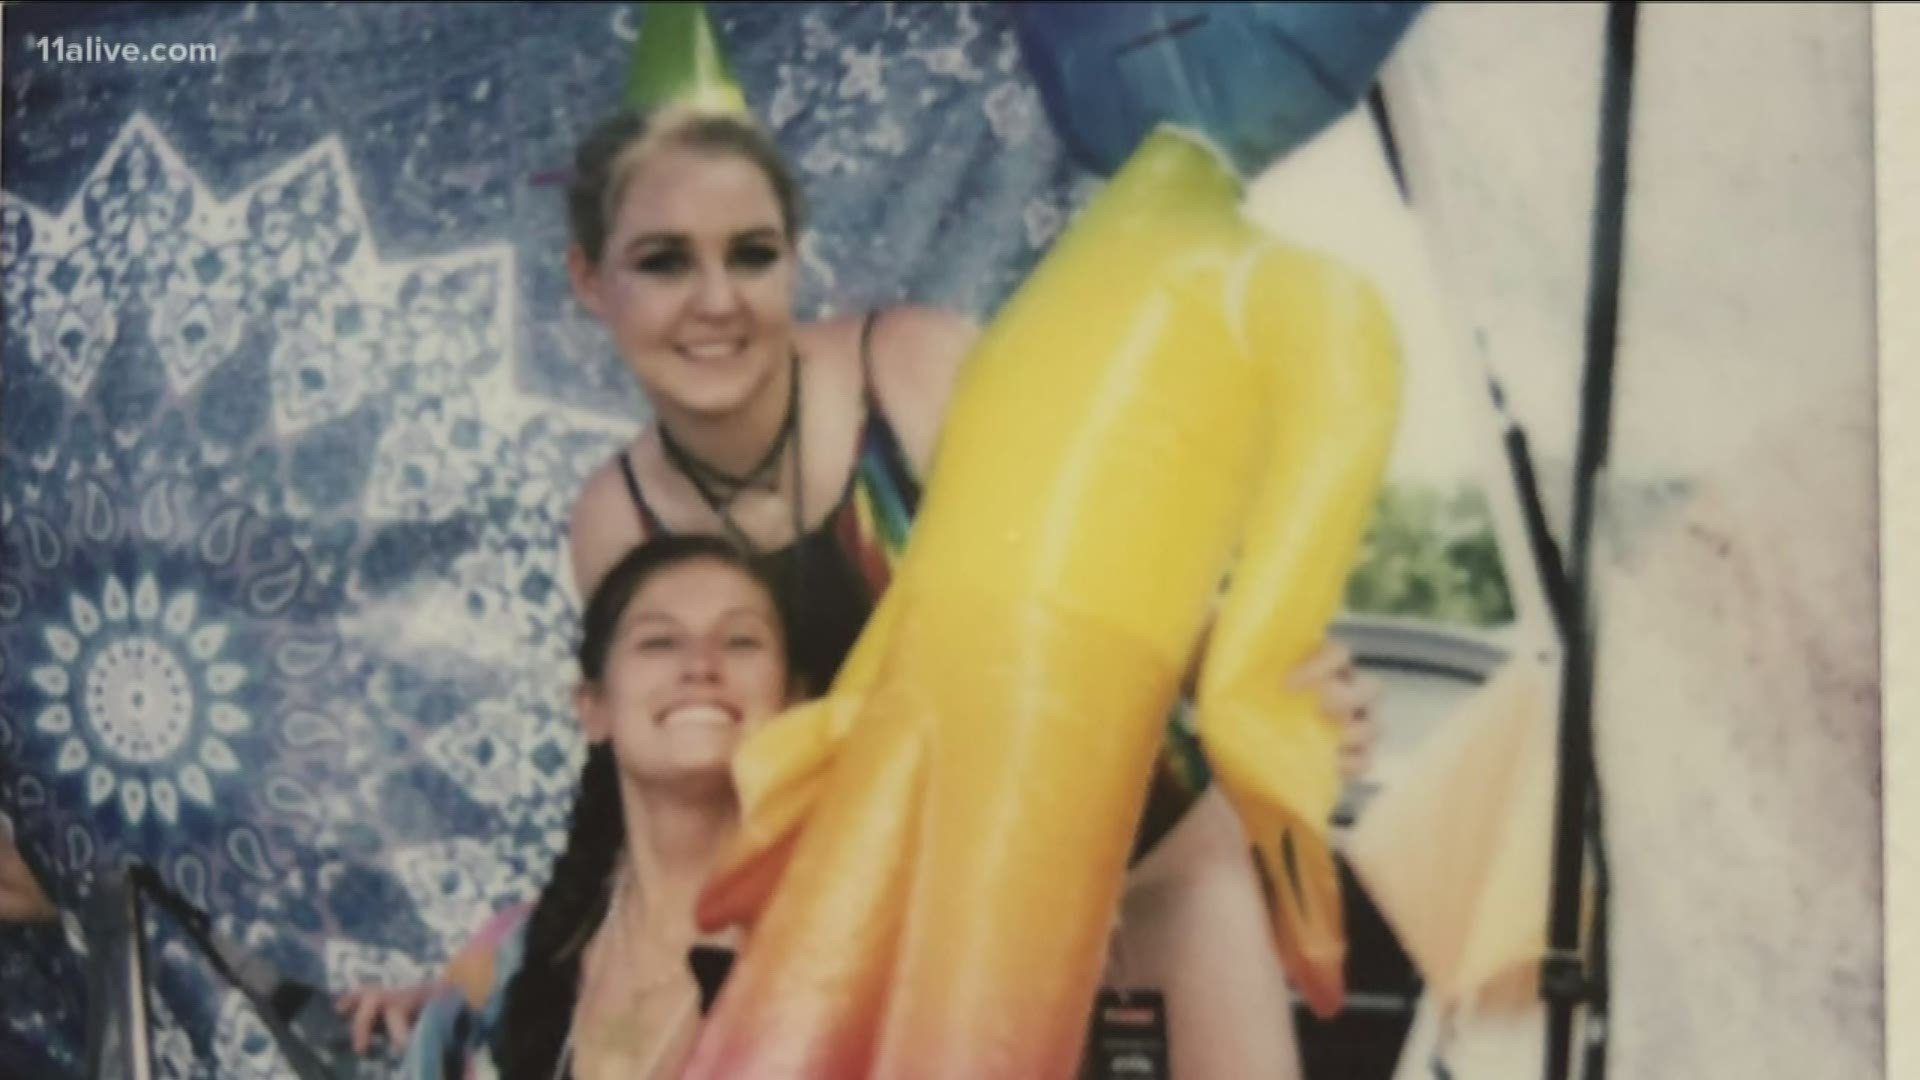 It was supposed to be a "last big hurrah" after graduation - a trip to Bonnaroo in Tennessee before starting their new jobs after college. But they were only an hour into the drive on State Road 136 in Tennessee when friends say three University of Georgia graduates crashed.